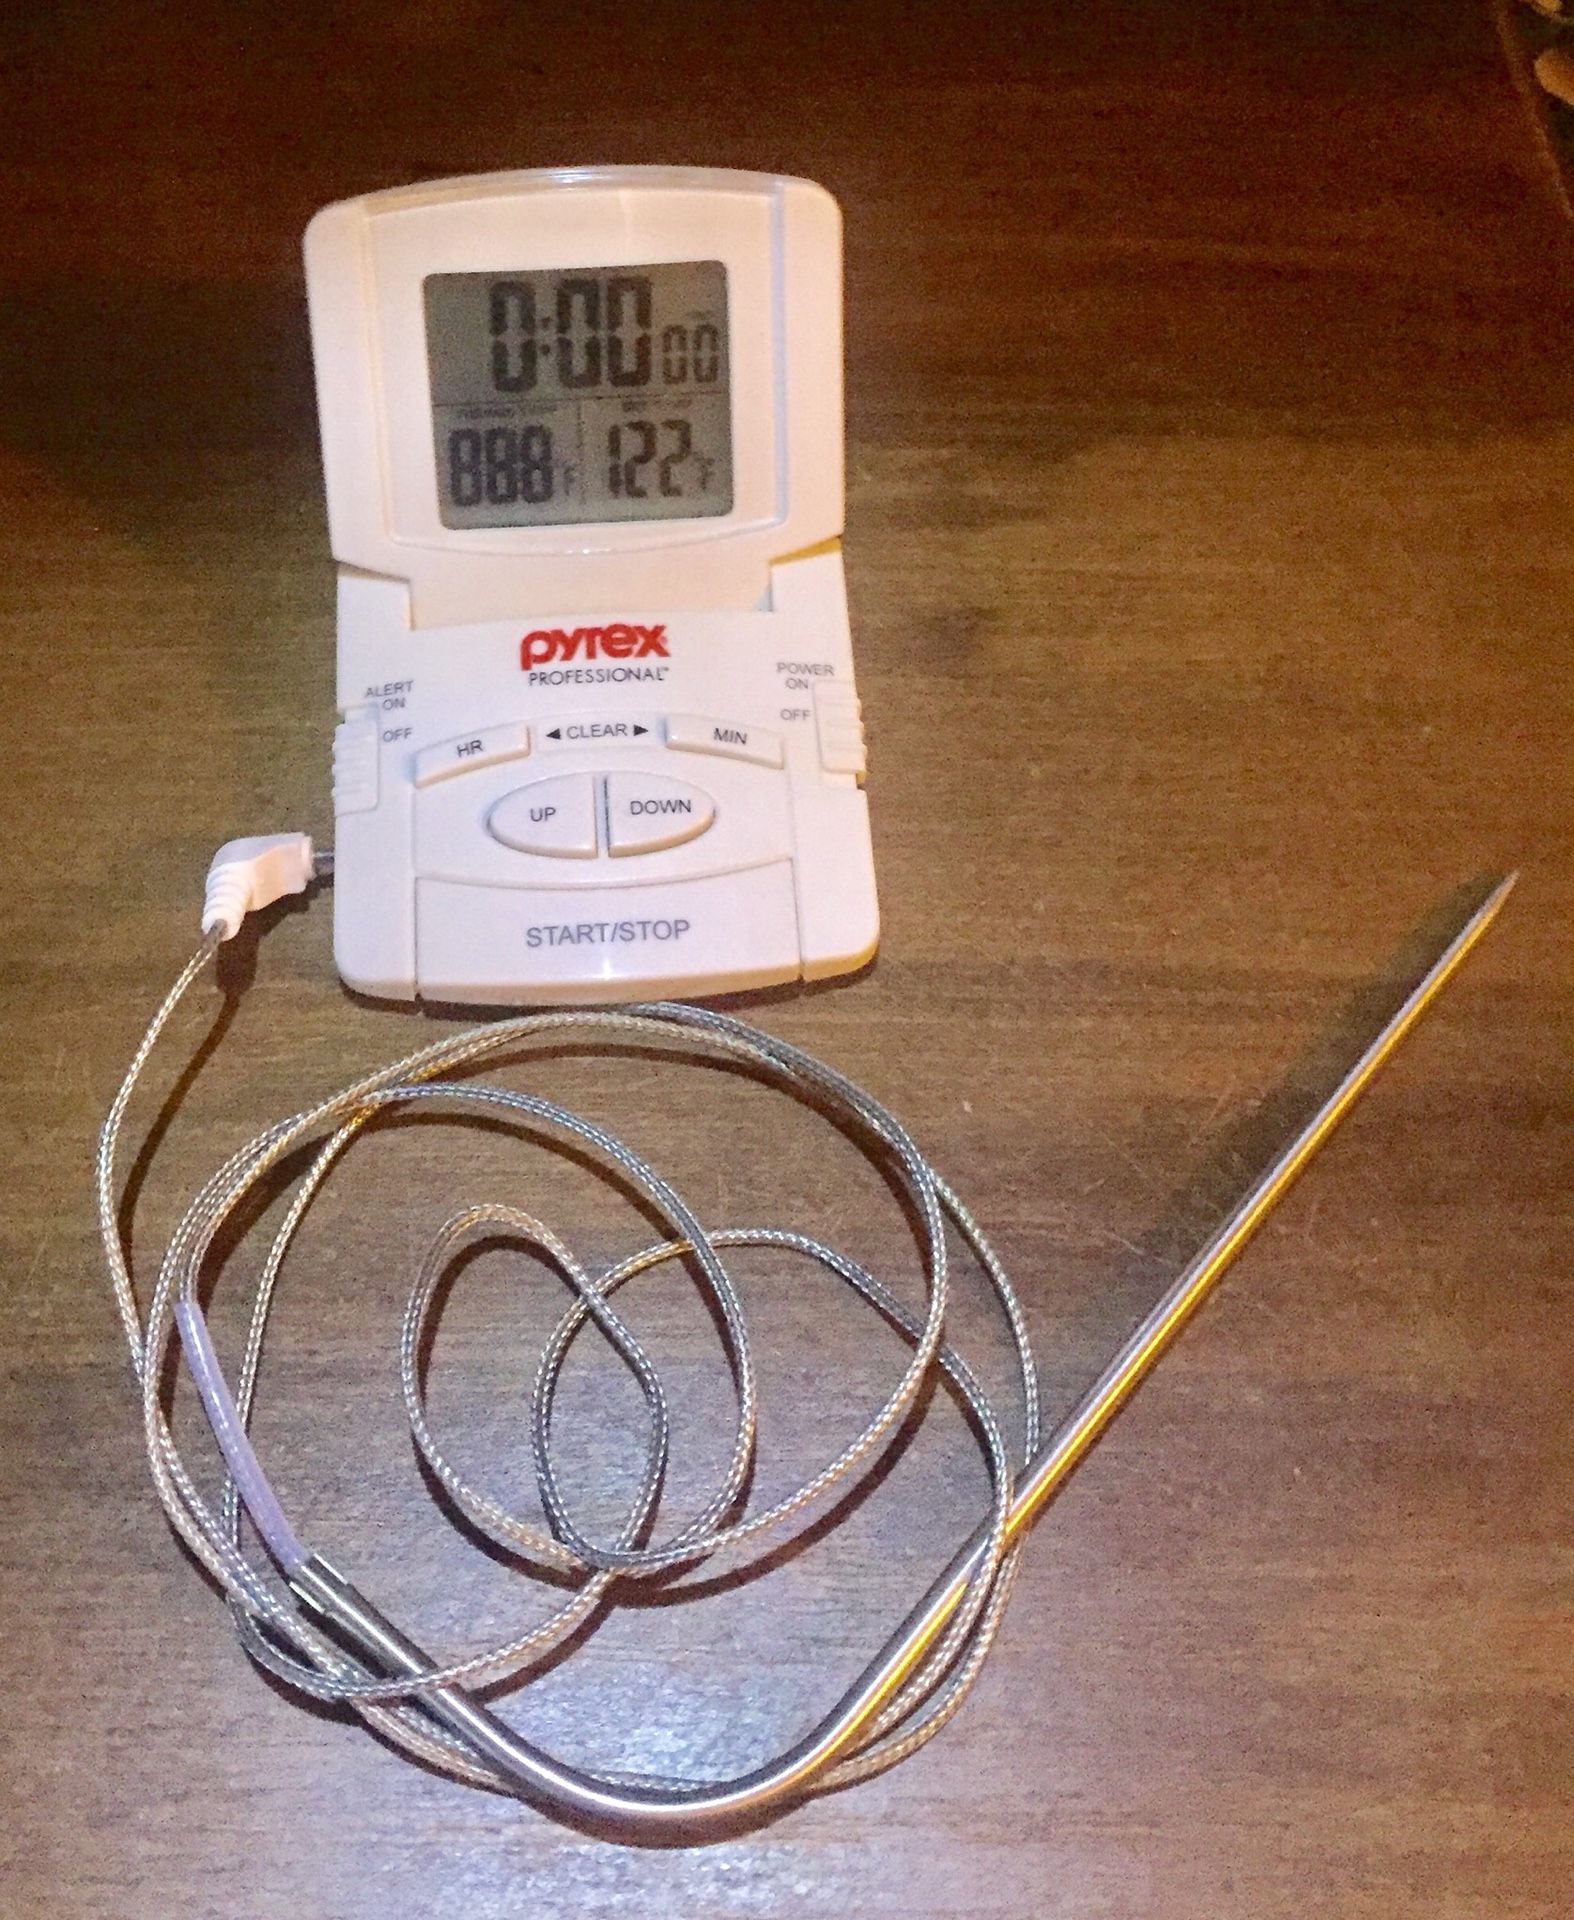 Pyrex Professional Digital Thermometer and Timer